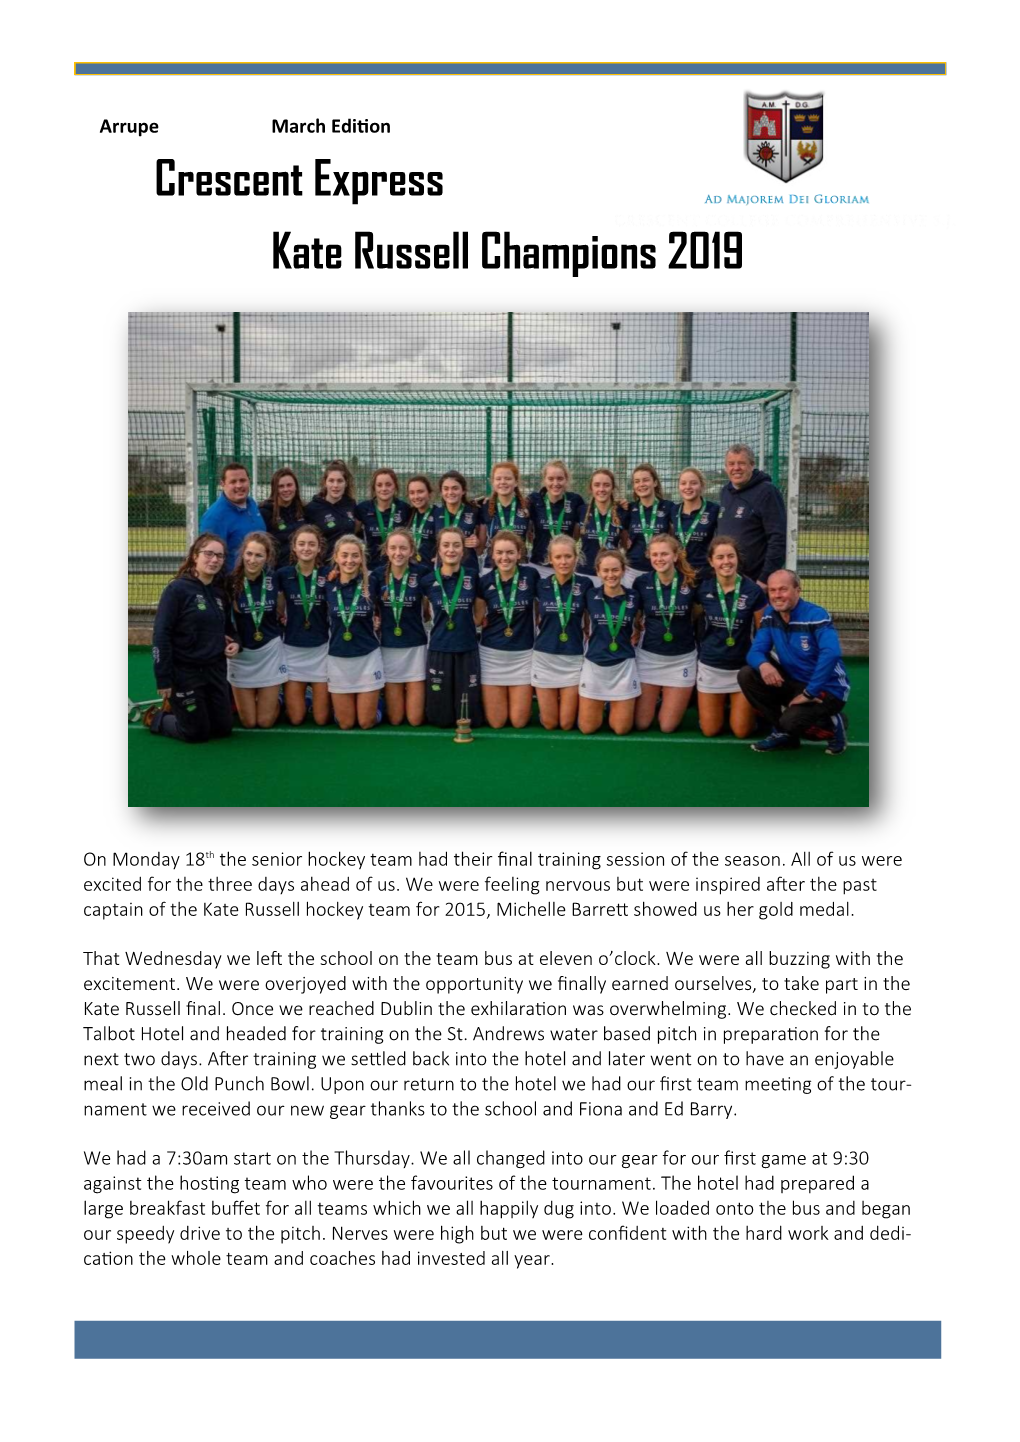 Crescent Express Kate Russell Champions 2019